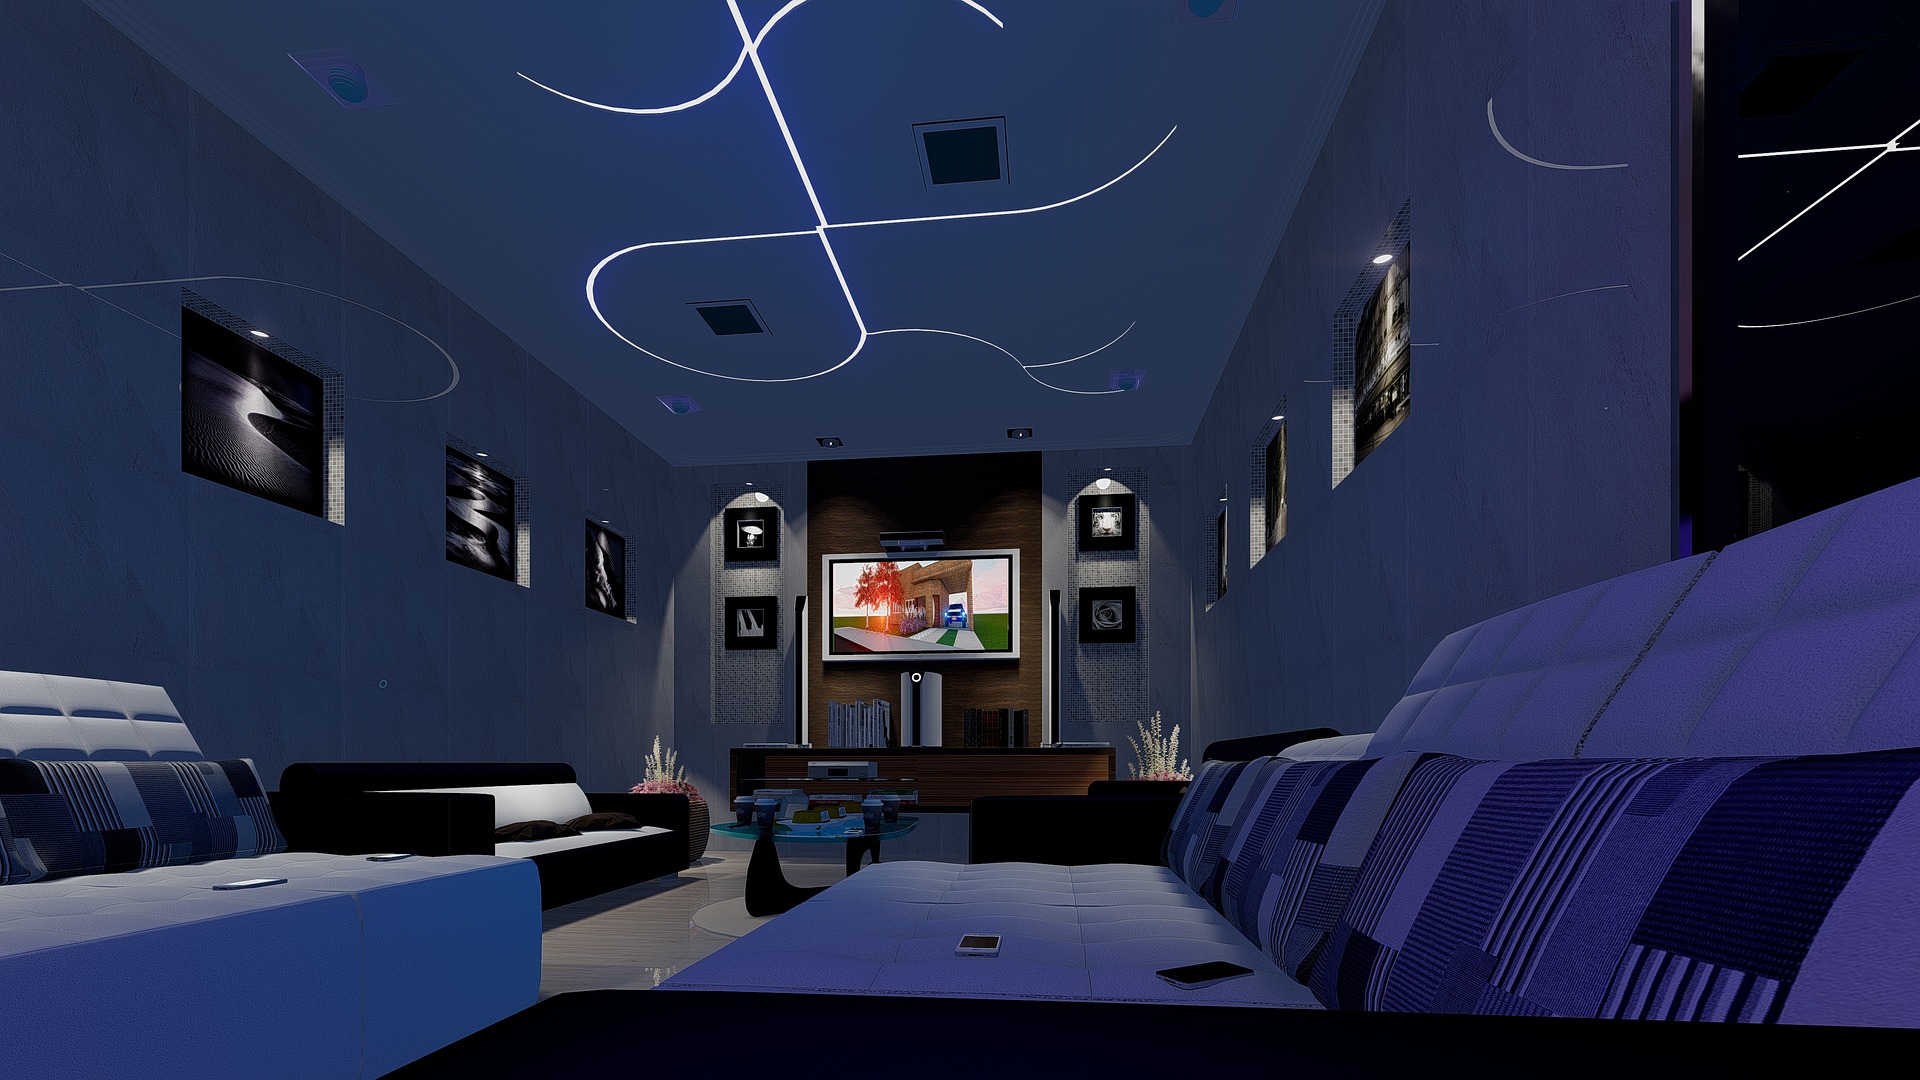 Home Theatre Installation Tips From the Pros